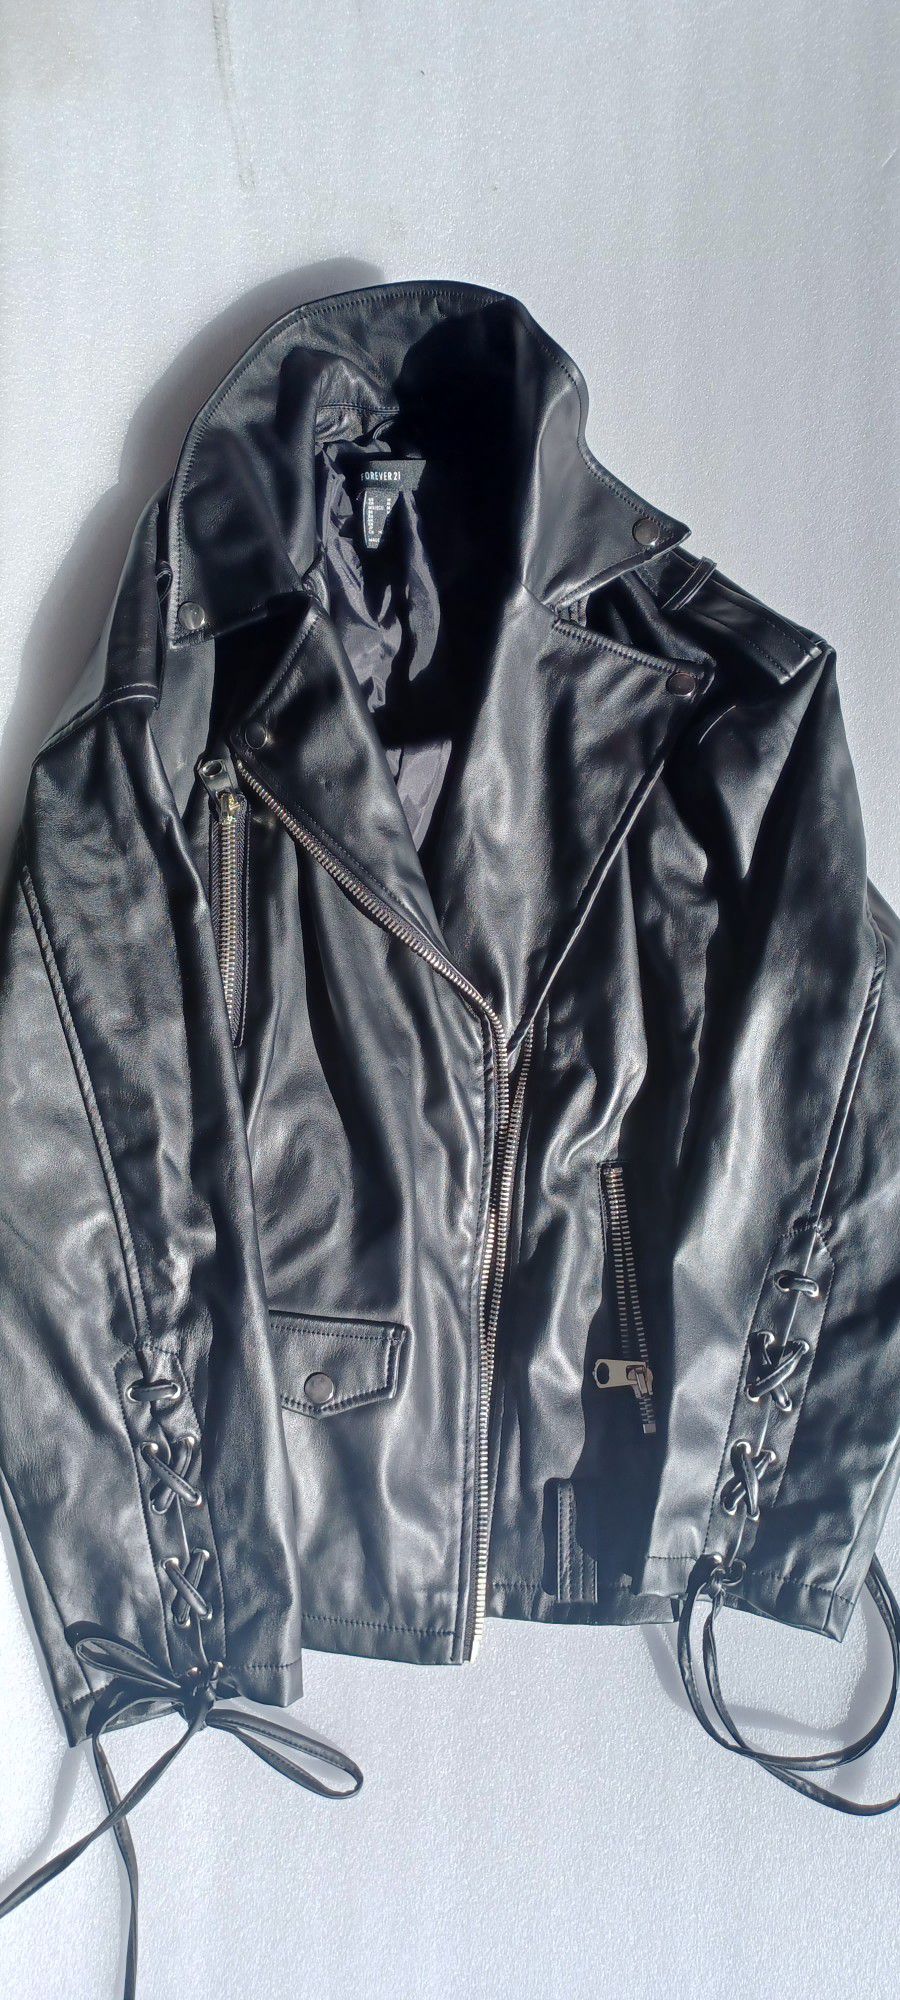 Jacket  Forever 21  Women's  Size M